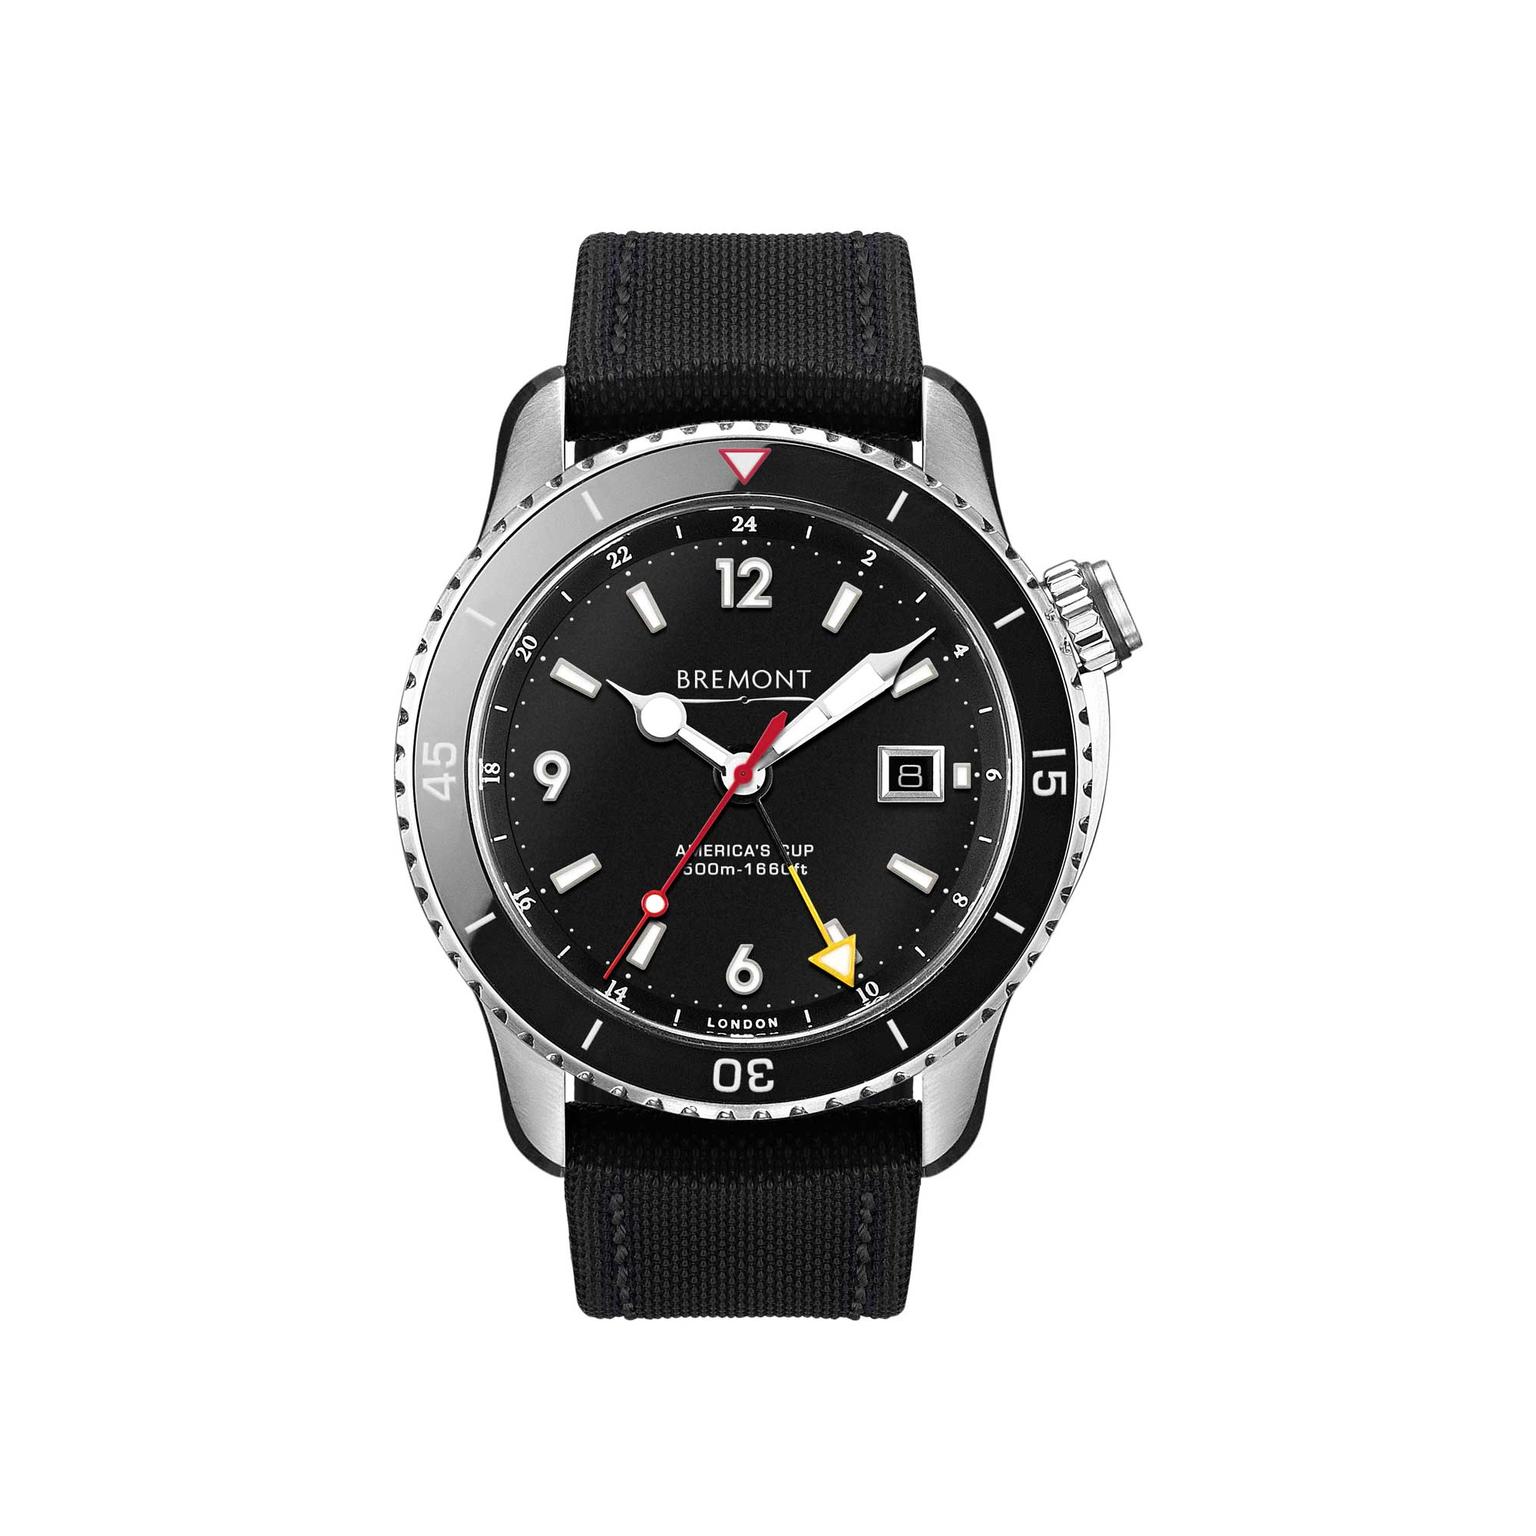 Louis Vuitton Tambour Regatta Automatic for $3,087 for sale from a Private  Seller on Chrono24